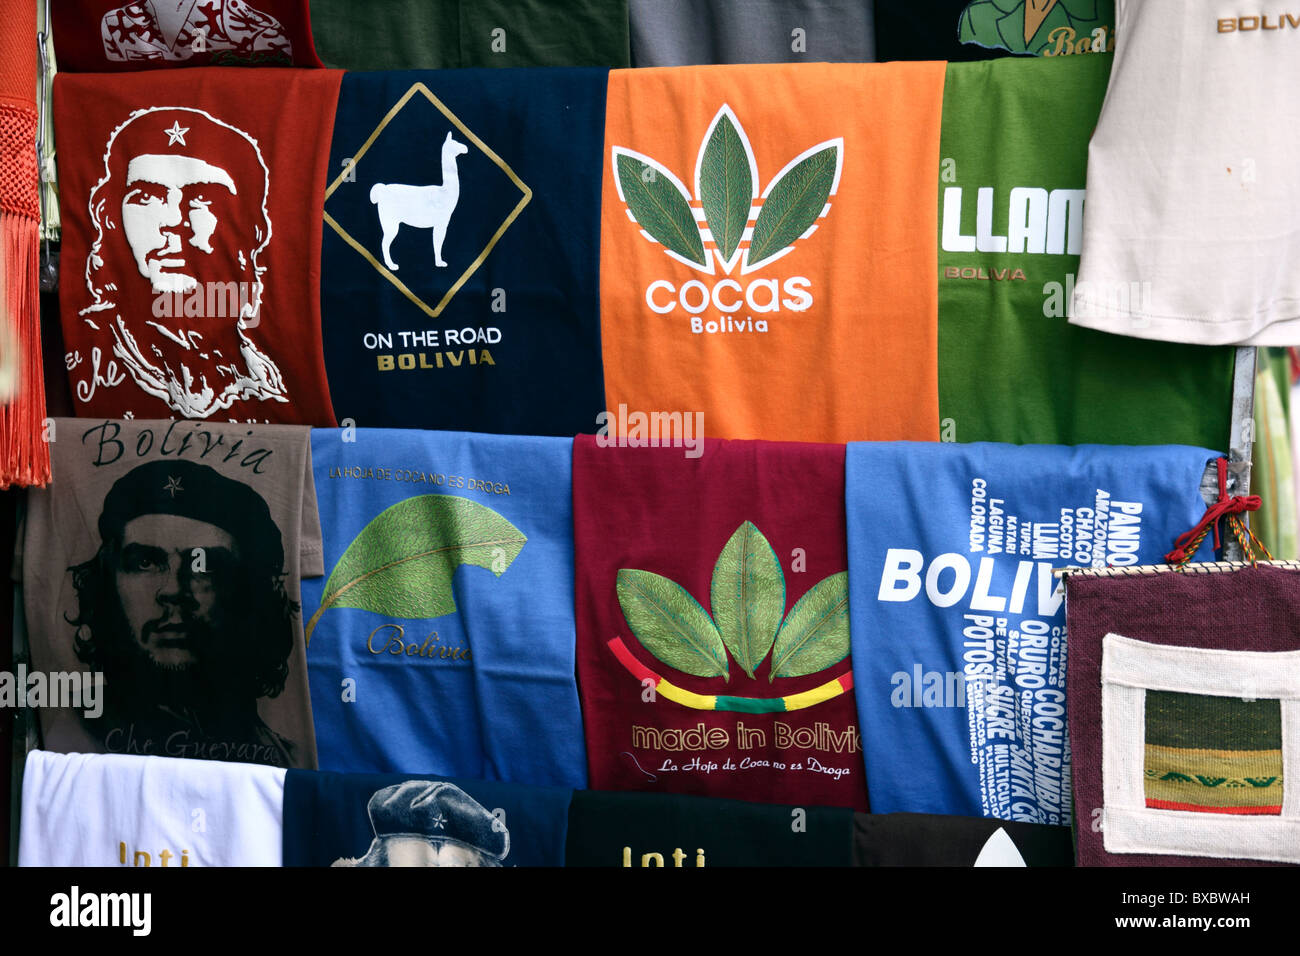 T-shirts with Che Guevara and coca leaves in form of Adidas logo for sale  outside shop in tourist market, Calle Linares, La Paz, Bolivia Stock Photo  - Alamy